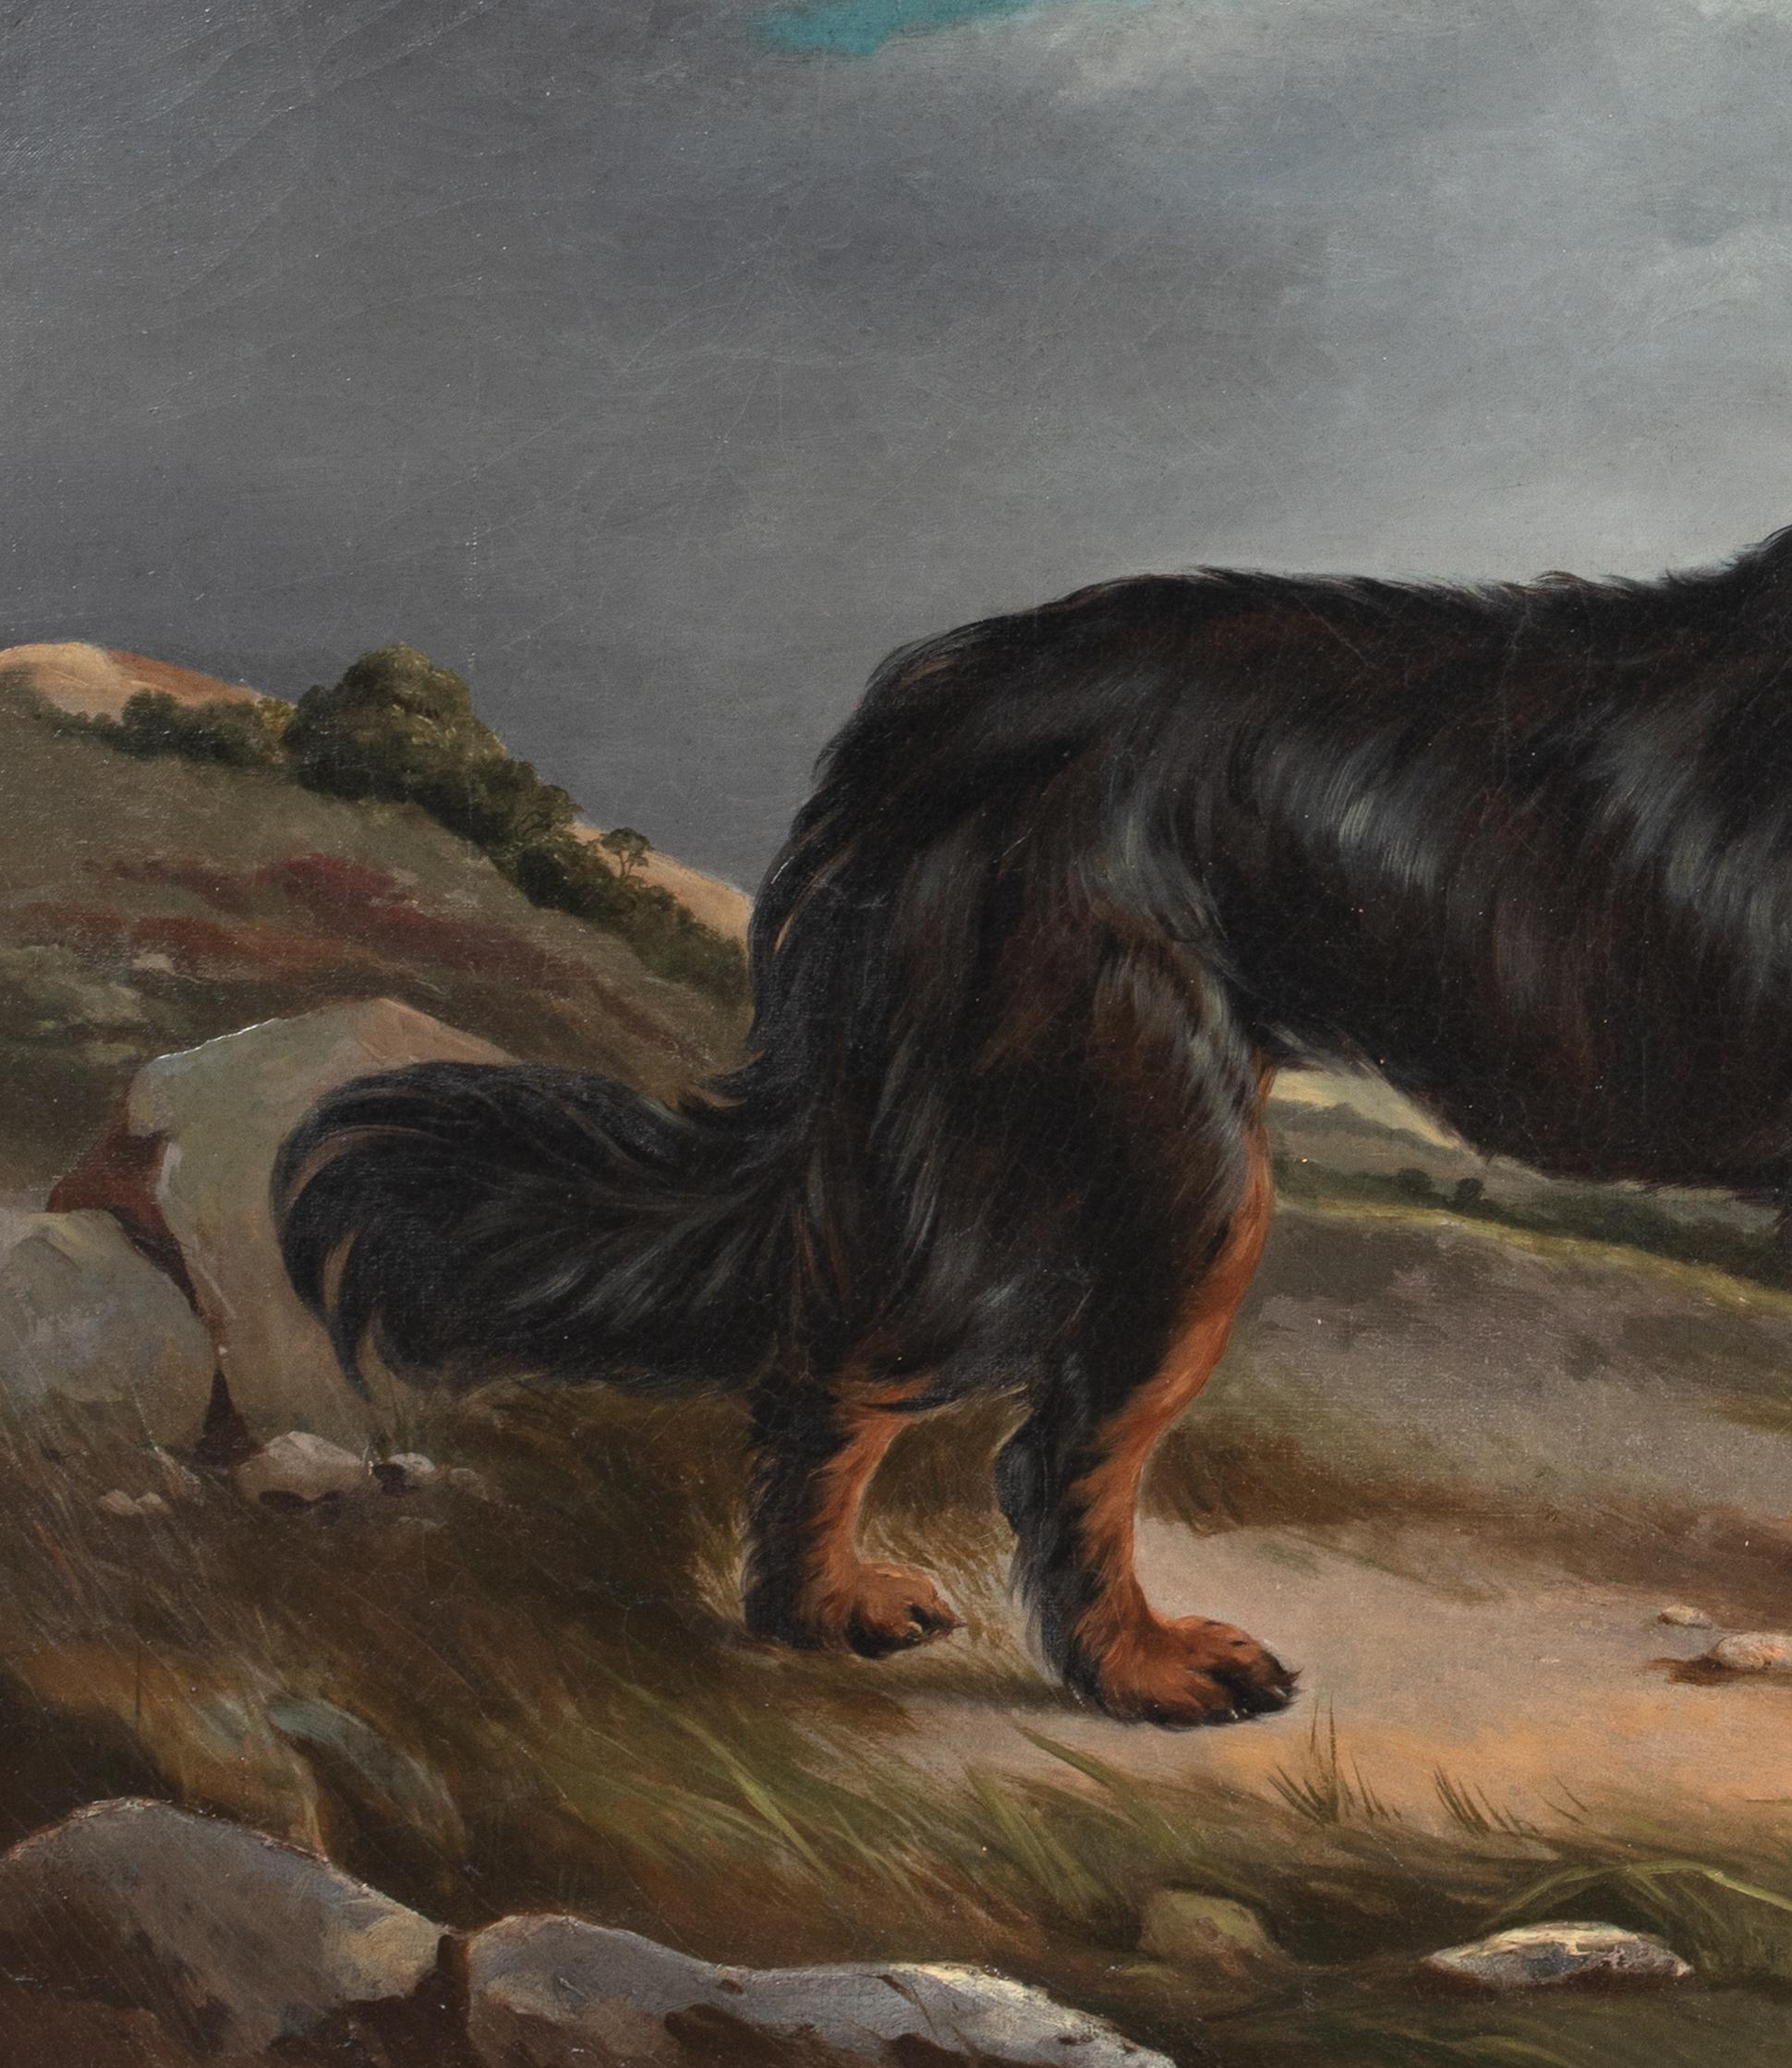 Black & Tan Border Collie In The Highlands, 19th Century 

circle of Sir Edwin Henry Landseer (1802-1873)

Large 19th Century English portrait of a black and tan border collie, oil on canvas. Good quality and condition similar to the works of